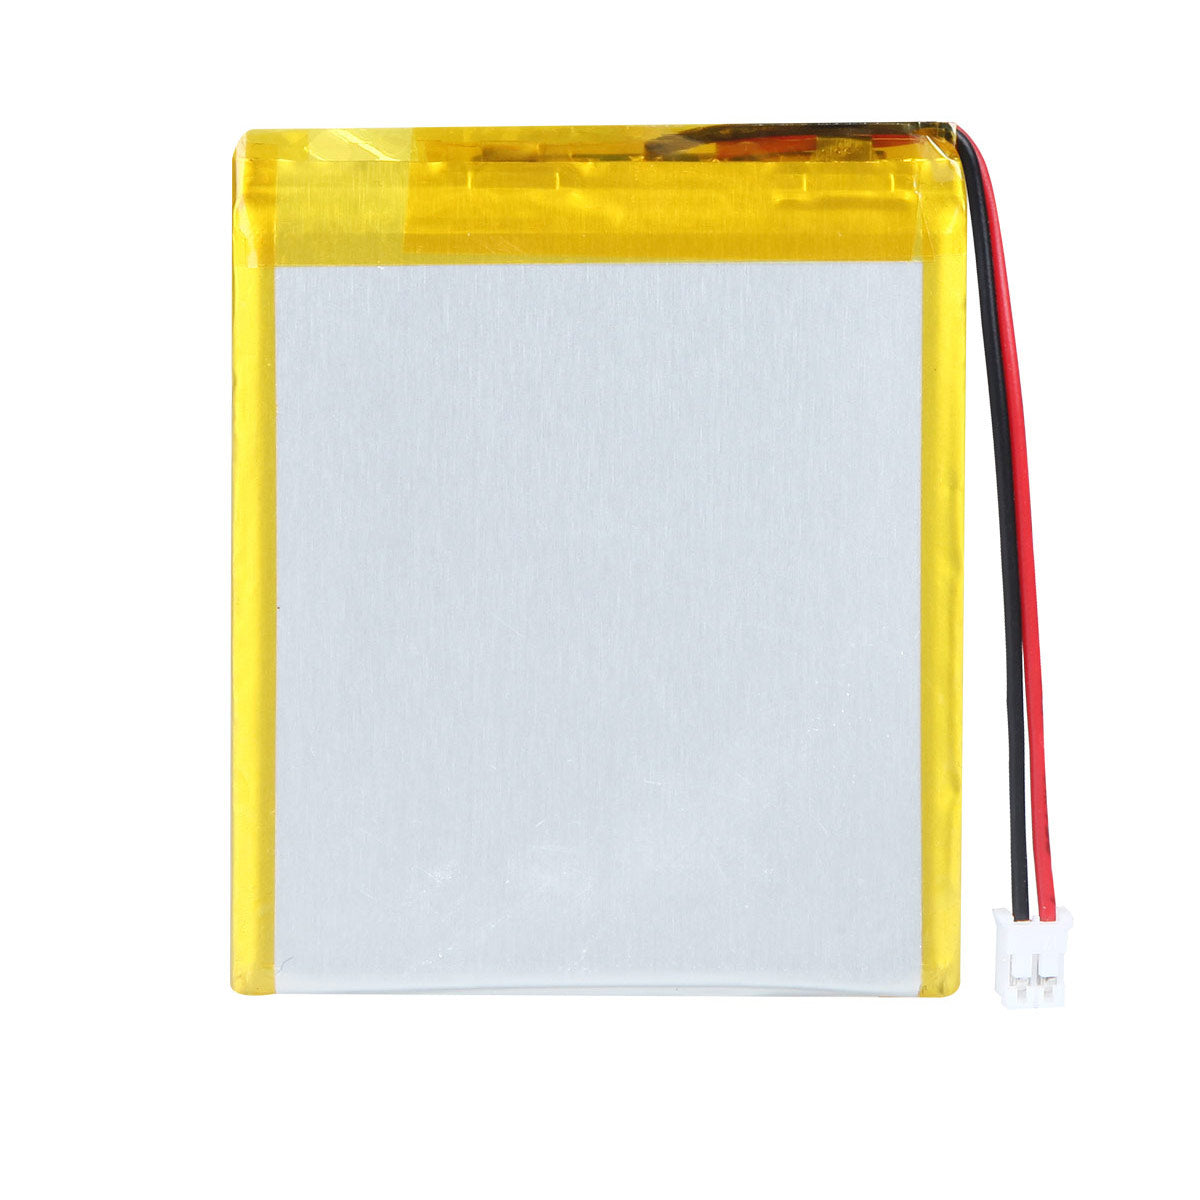 3.7V 2200mAh 555462 Rechargeable Lithium Polymer Battery